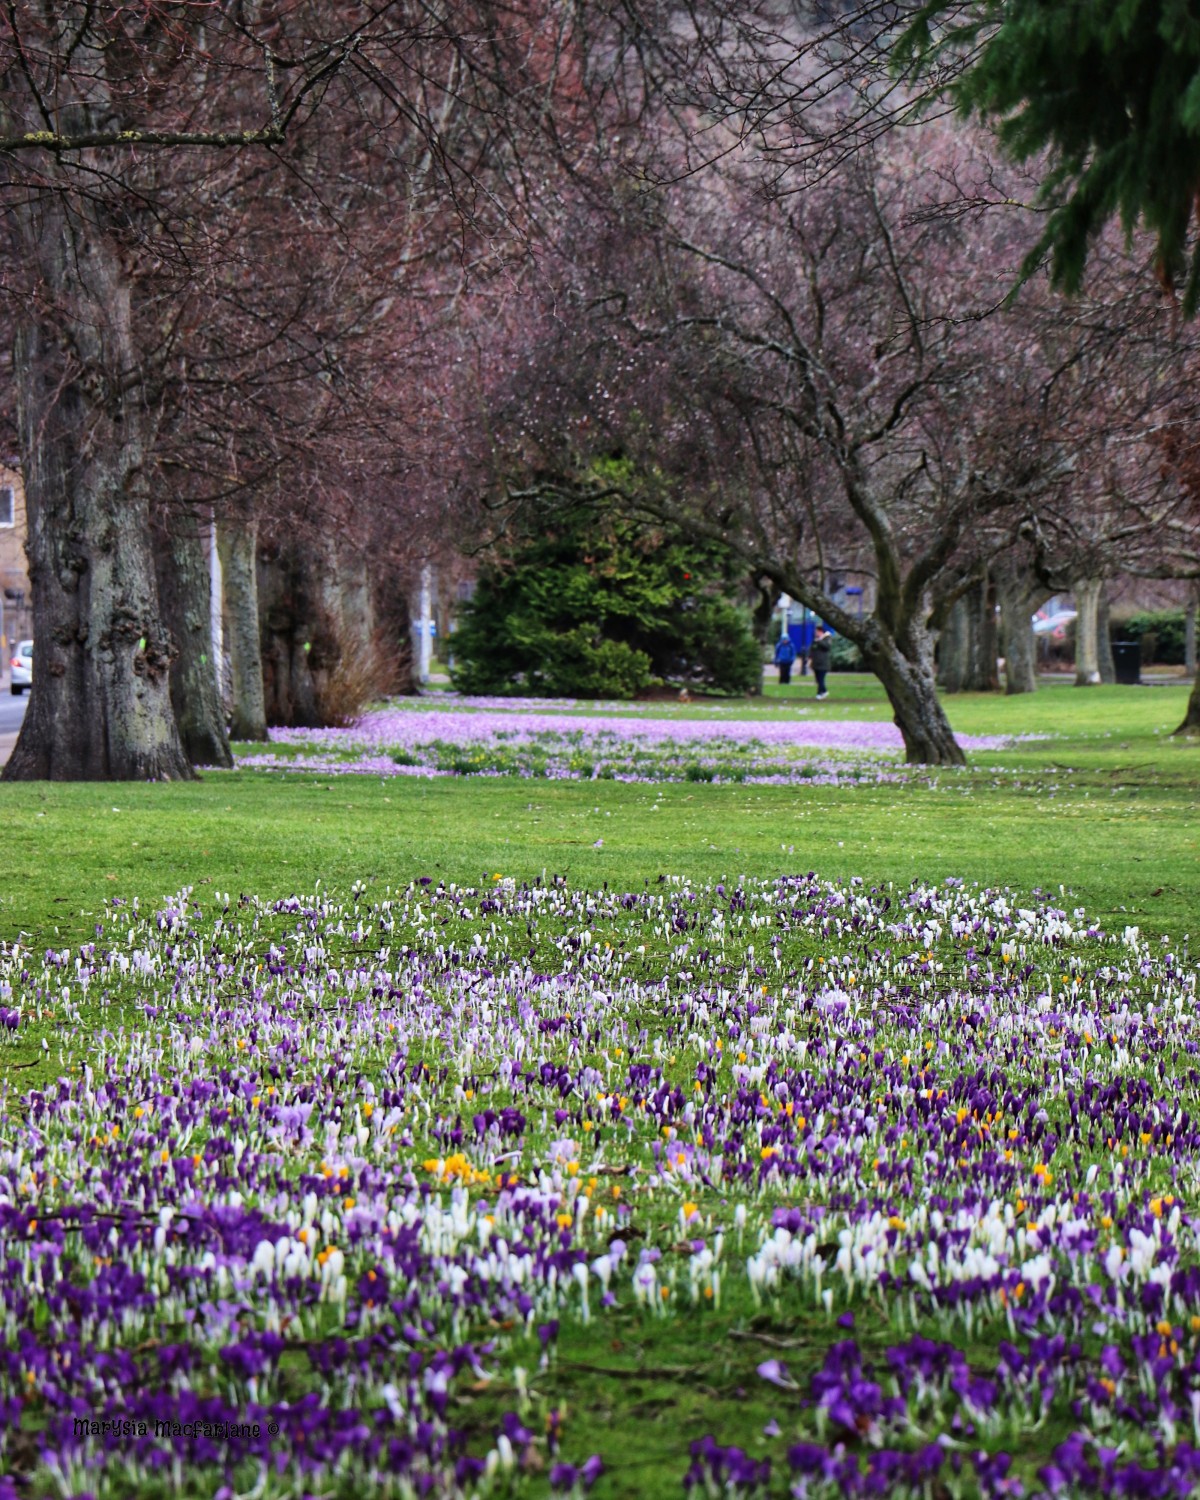 Beautiful crocus beds on the South Inch is a sure sign spring has sprung!